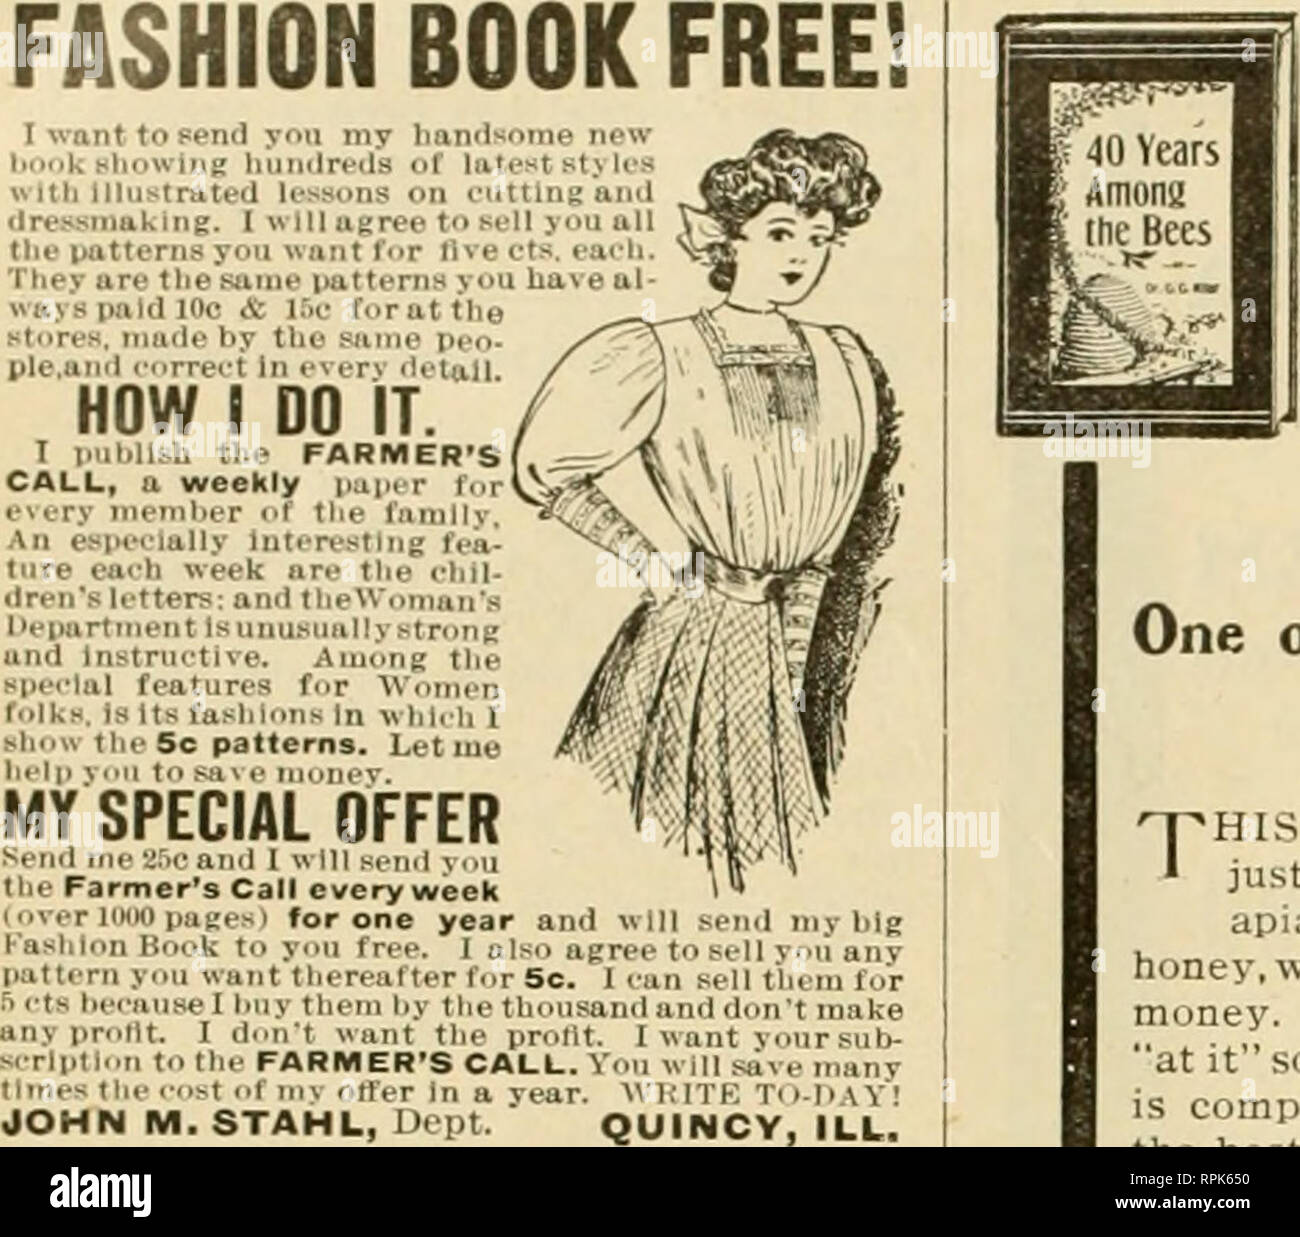 American bee journal. Bee culture; Bees. Octoher, 1908. American Hee  -Journal FASHION BOOK FREE! I want to Fend you my Imntisom* hocik fliowing  hundreds of latent with illustrated lessons on euttln